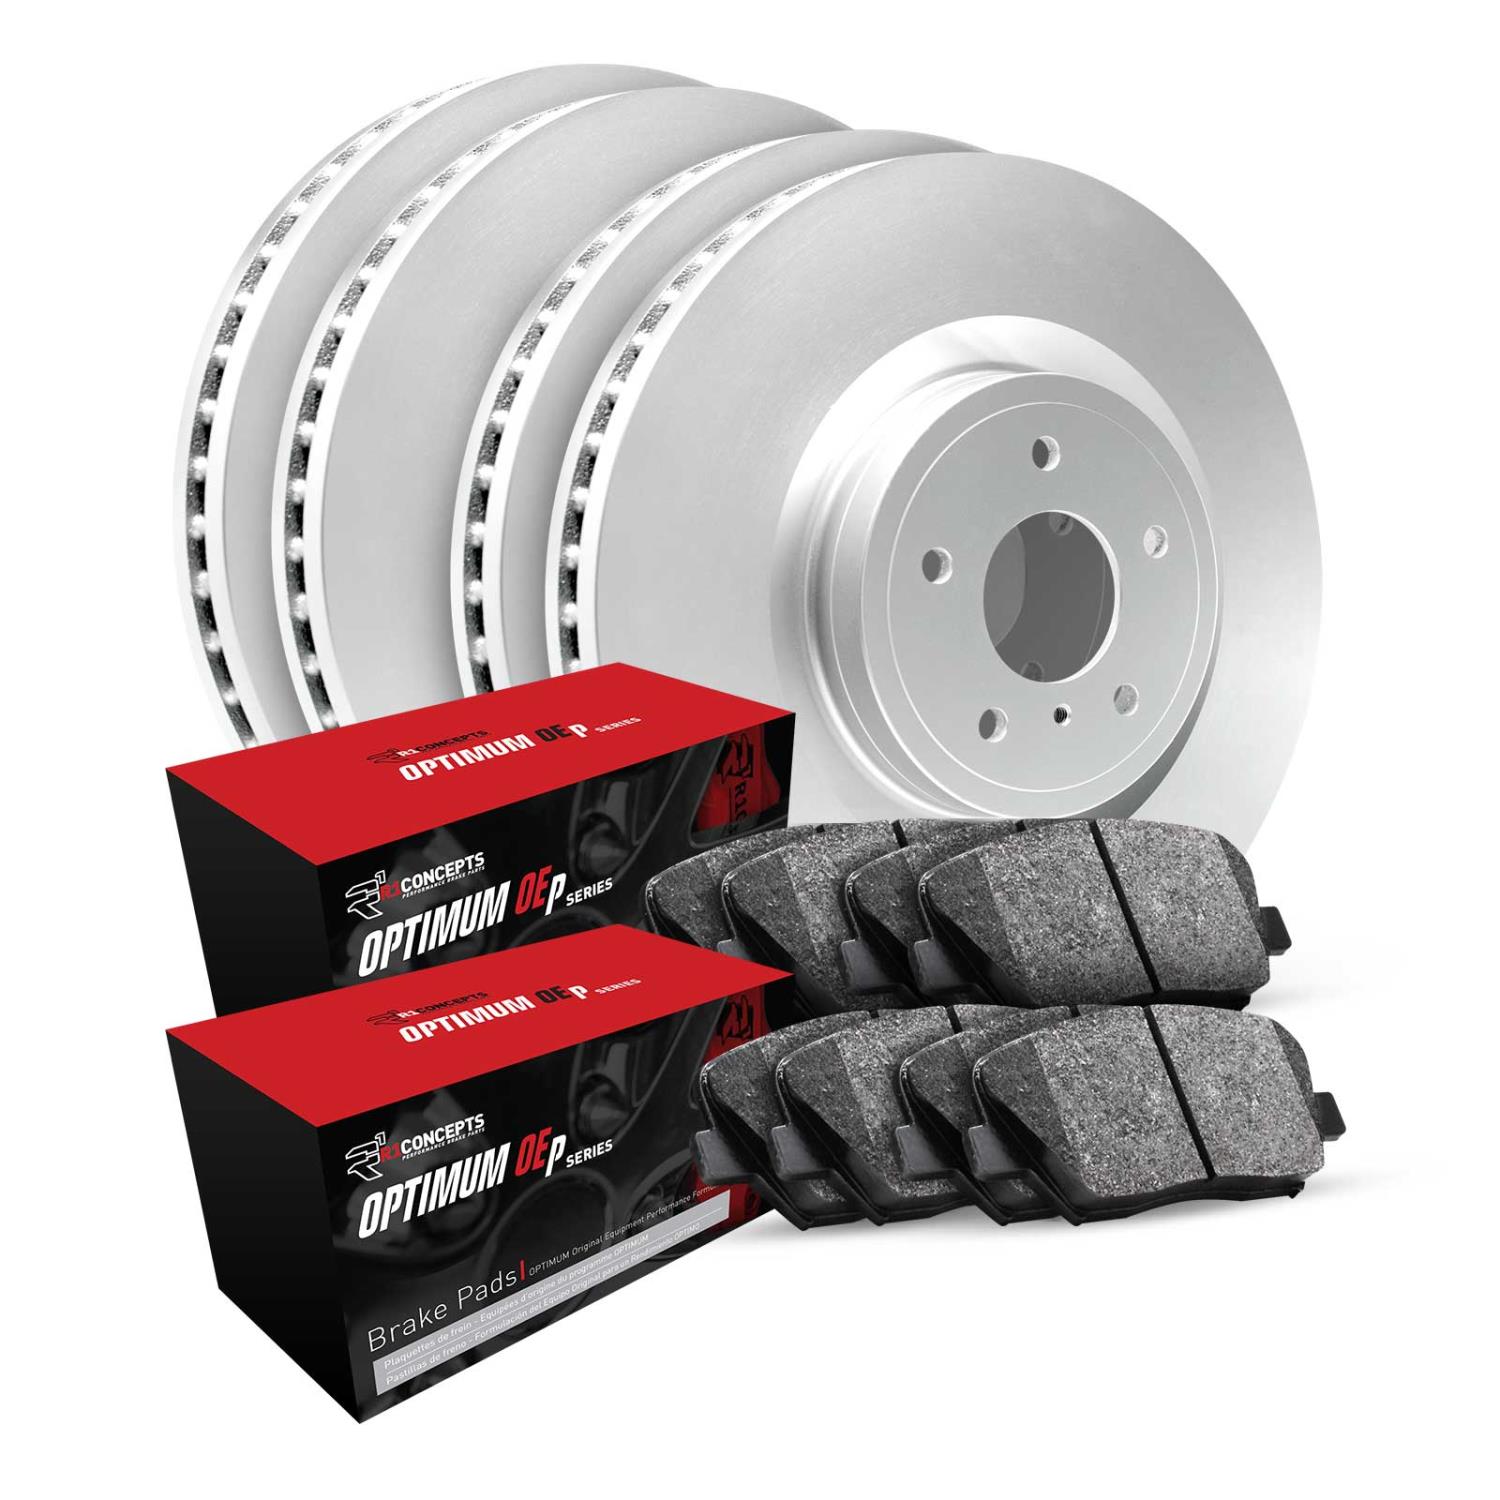 GEO-Carbon Brake Rotor & Drum Set w/Optimum OE Pads & Shoes, 1973-1973 GM, Position: Front & Rear